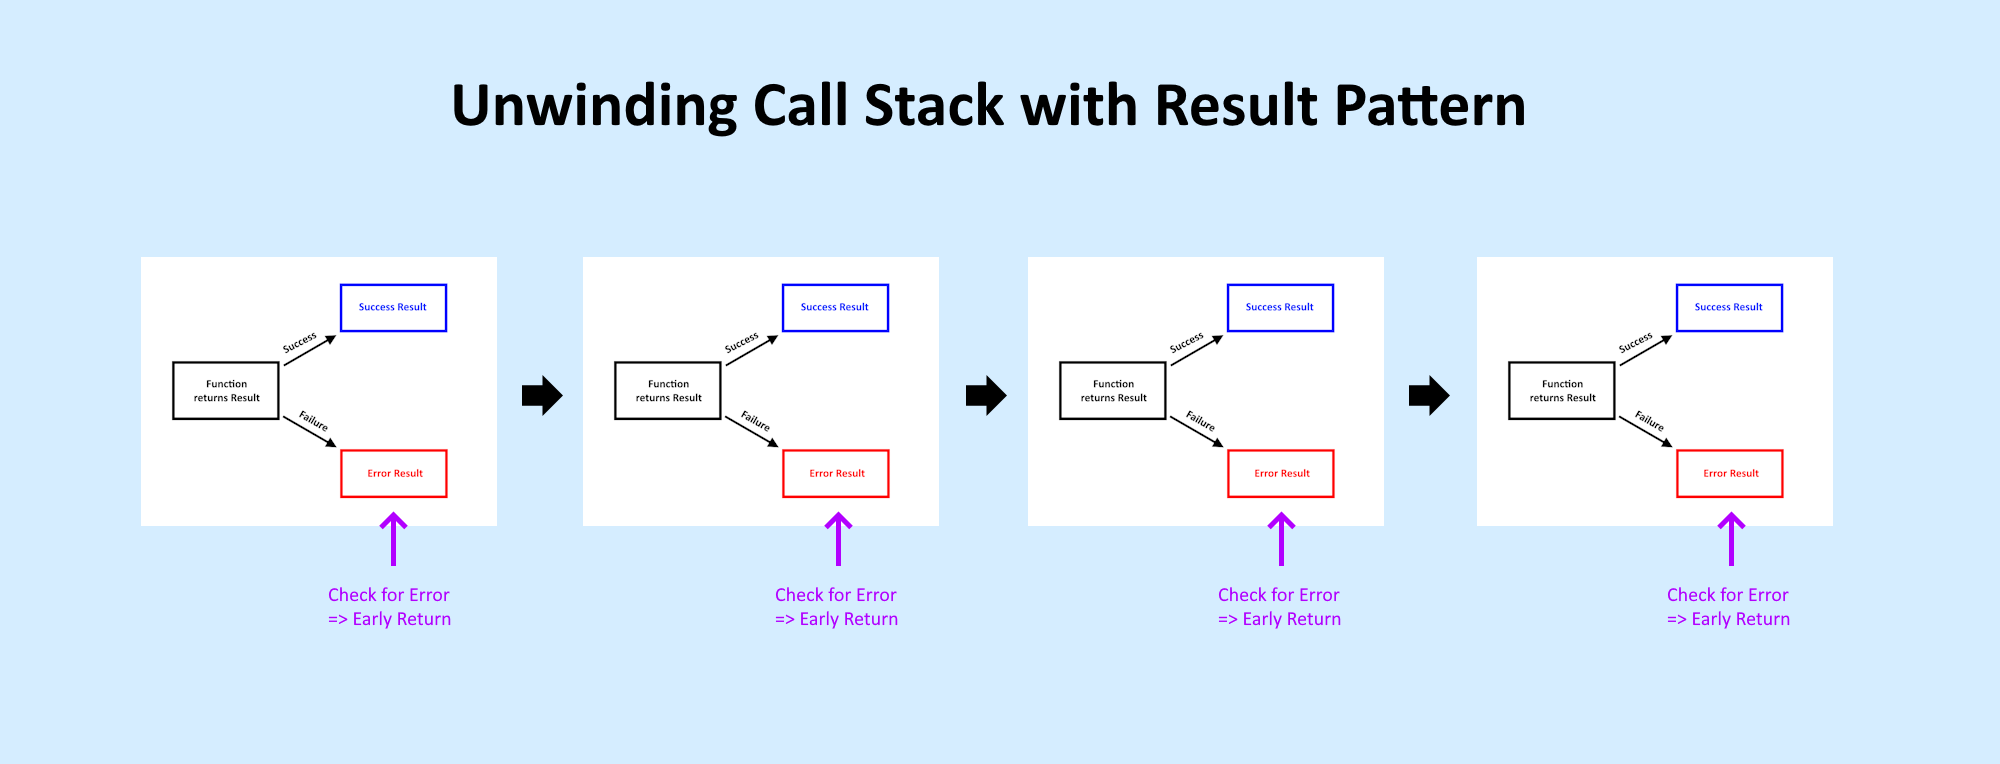 Unwinding Call Stack with Result Pattern